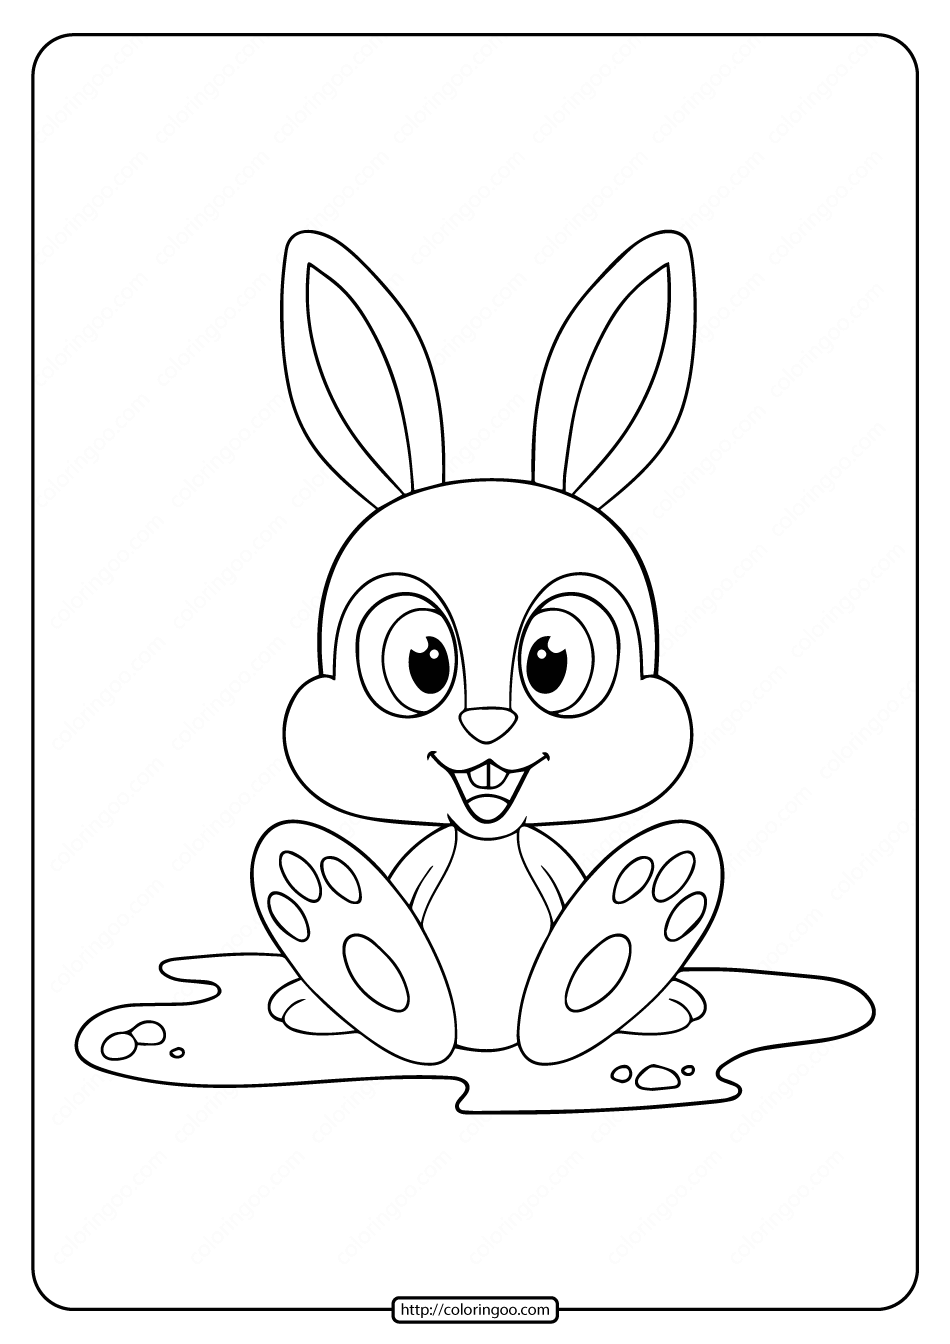 printable cute baby rabbit coloring pages